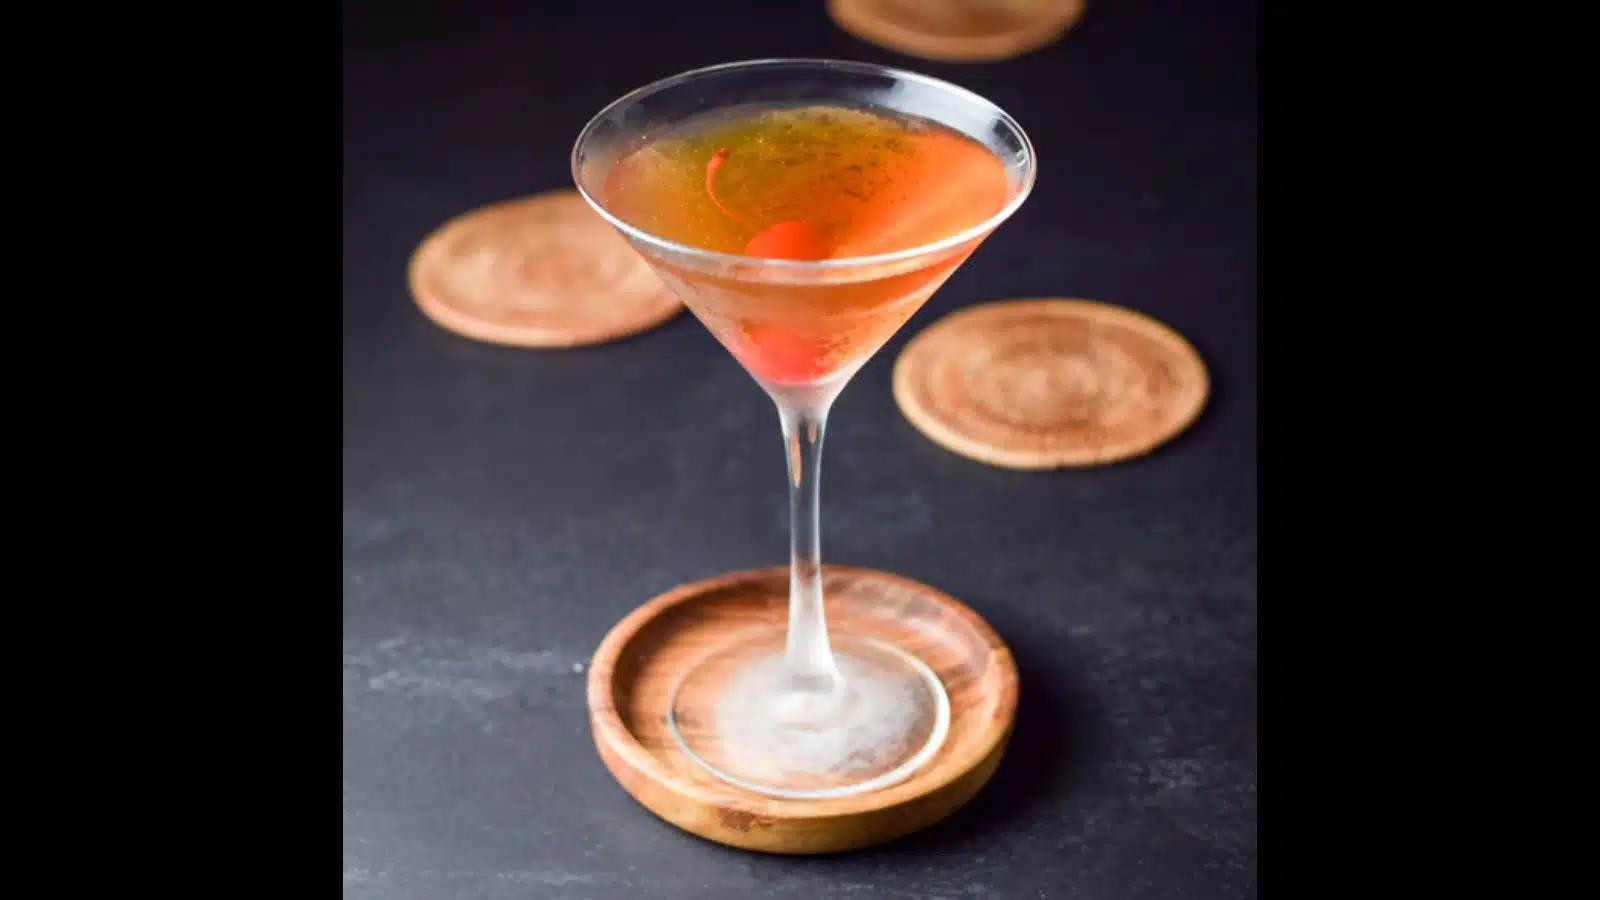 A reddish cocktail in a chilled martini glass with coasters in the back